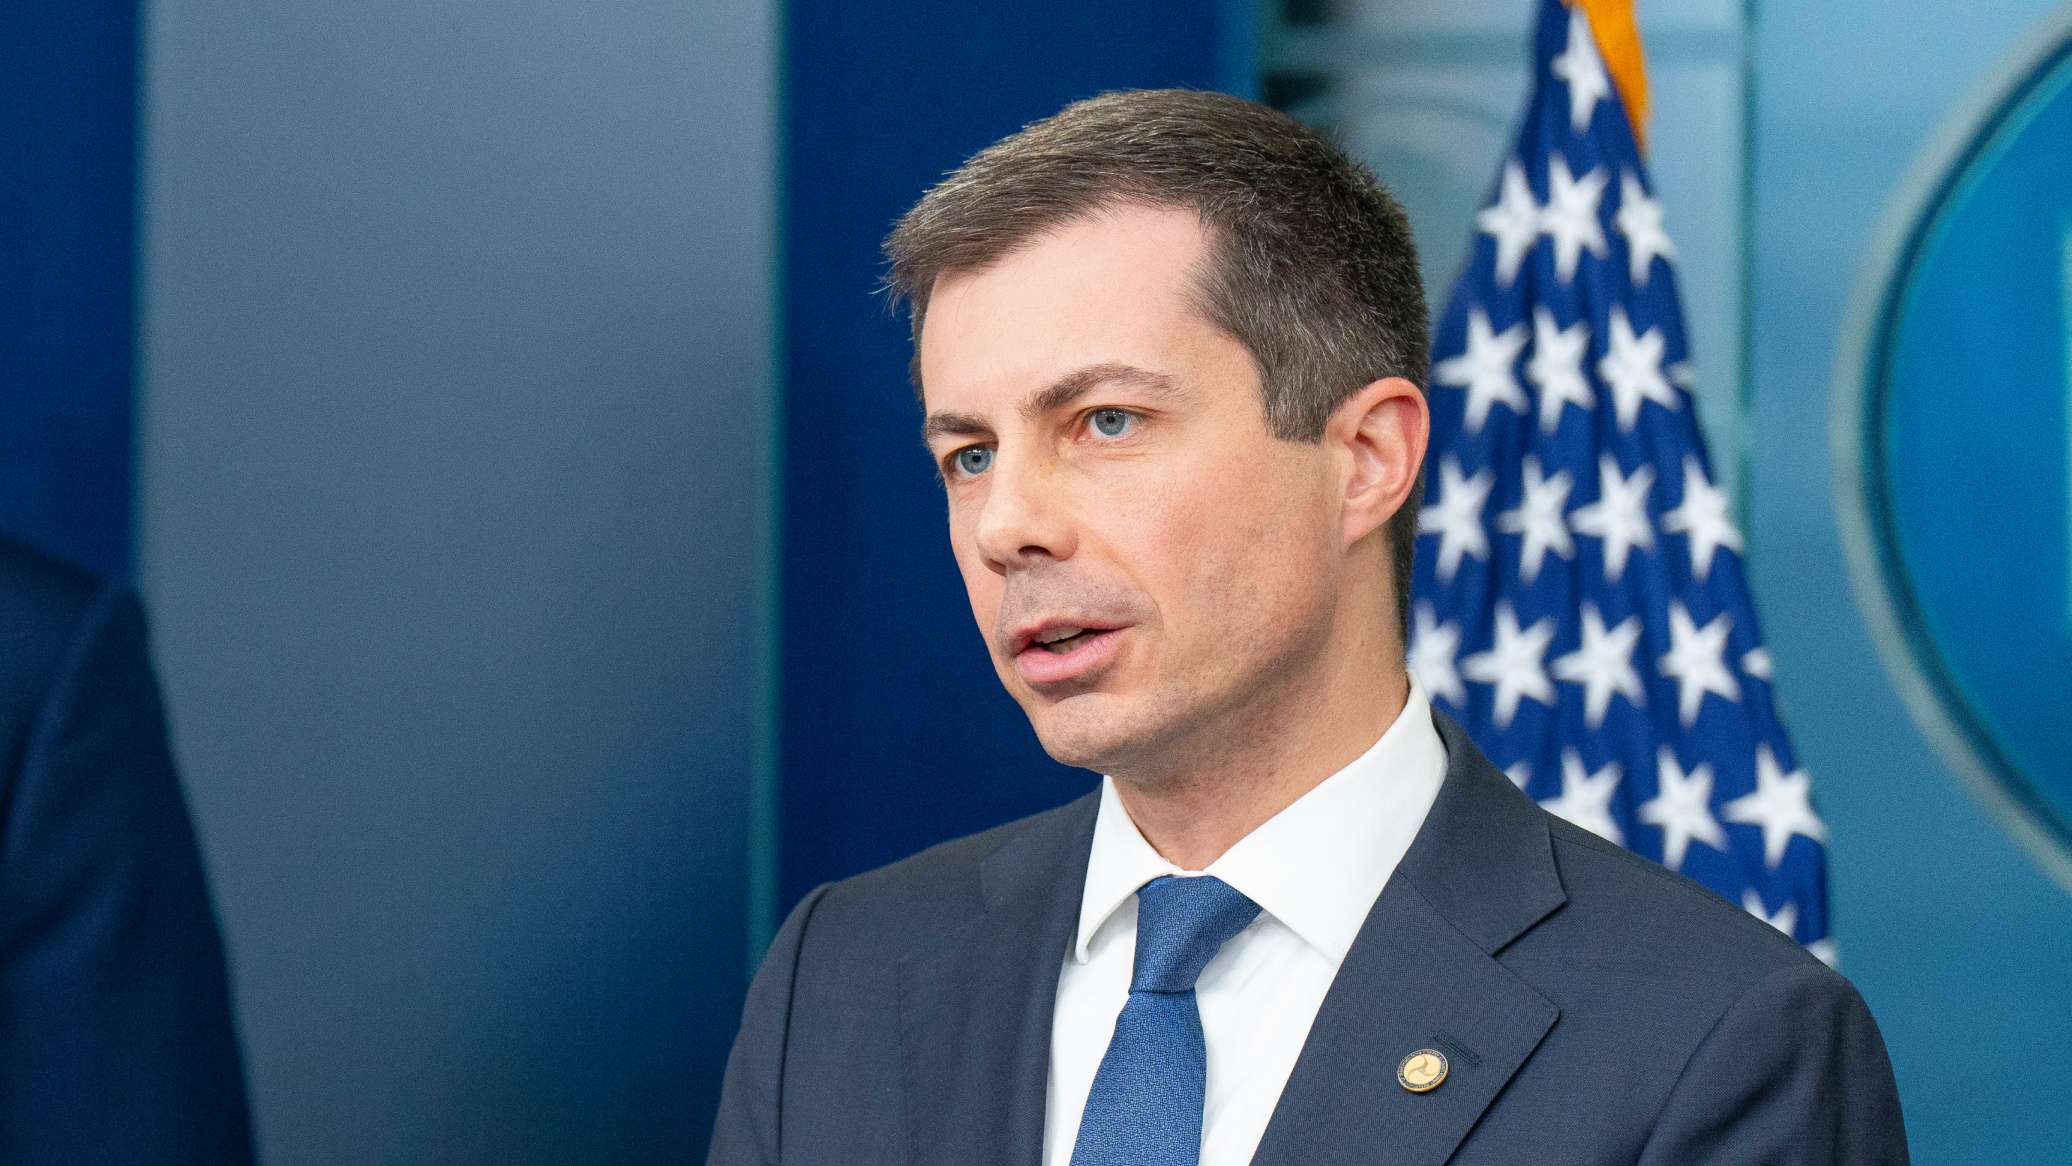 Transportation Secretary Pete Buttigieg has joined a chorus of Biden administration officials who all agree tariffs are needed to counter China’s mercantilism and export strategy.